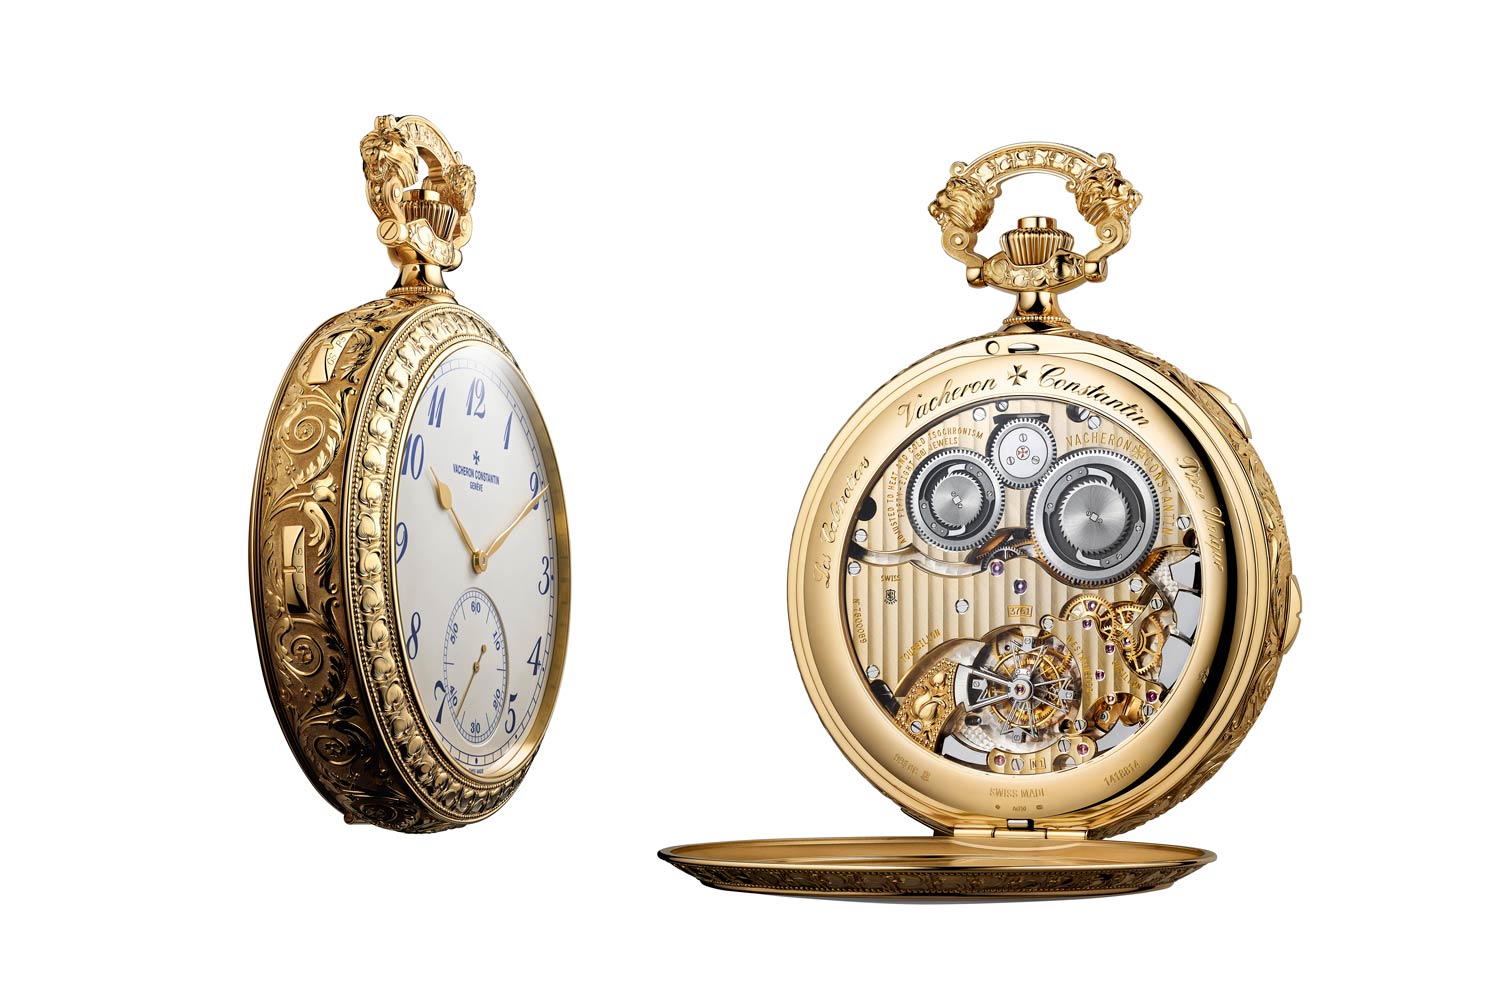 A bespoke timepiece made for a collector, who is always seeking to own a watch “theoretically impossible to obtain”, the Les Cabinotiers Westminster Sonnerie – Tribute to Johannes Vermeer, is equipped with a Westminster chime with five gongs, five hammers, Grande and Petite Sonnerie and an officer-type cover featuring a beautiful miniature enamel painting by Anita Porchet.